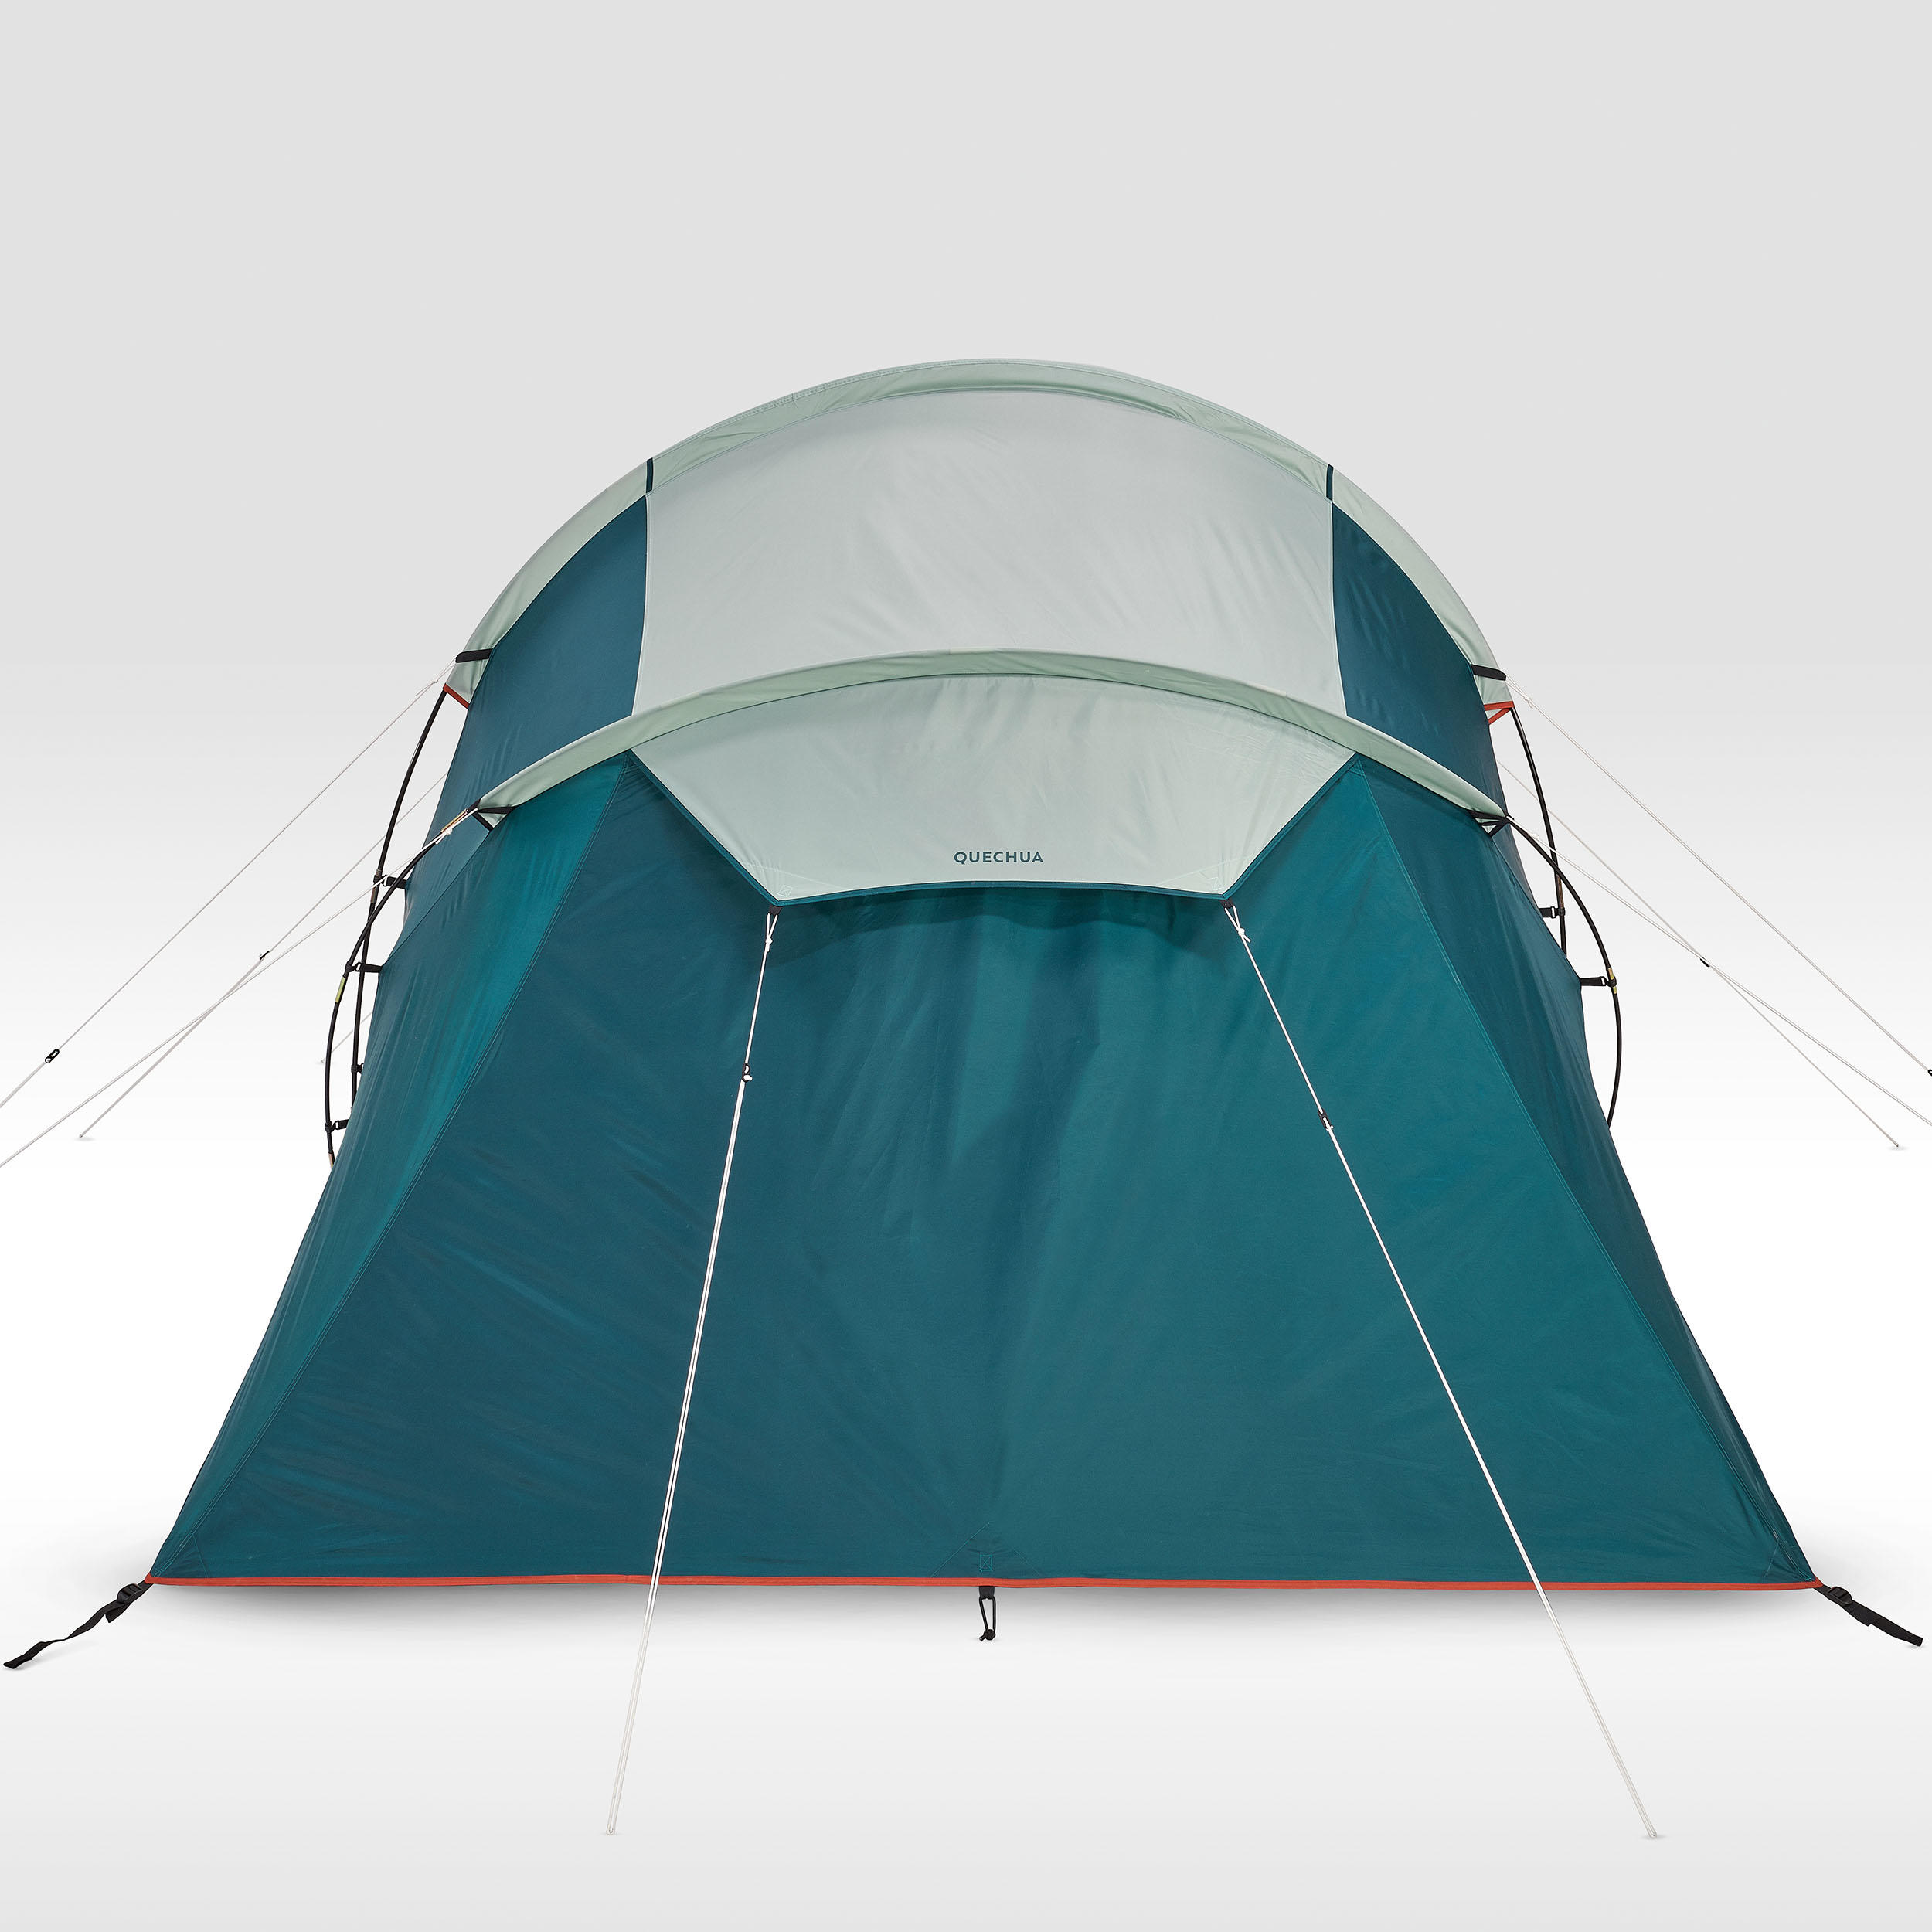 Camping Tent with Poles Arpenaz 4.2 4 People 2 Bedrooms 9/20